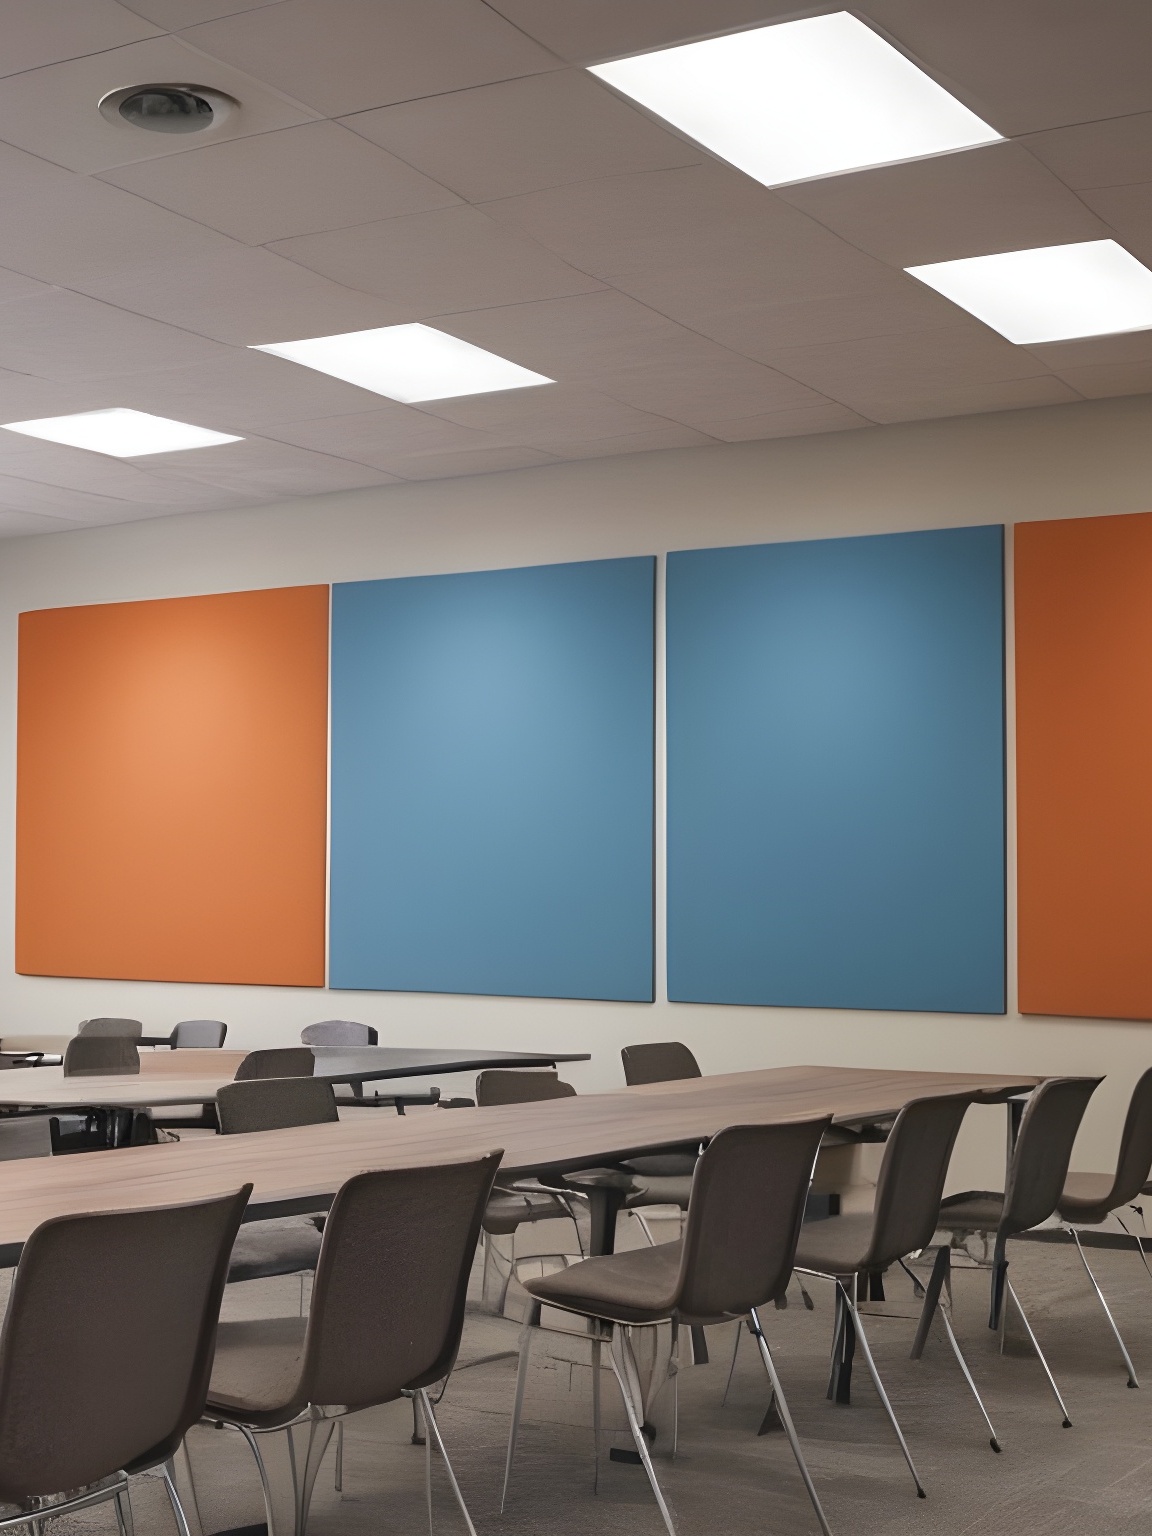 A-photo-of-an-interior-scene-with-fiberglass-panel-acoustic-ceiling-and-wall-acoustic-panels-in-various-colors_副本nwx